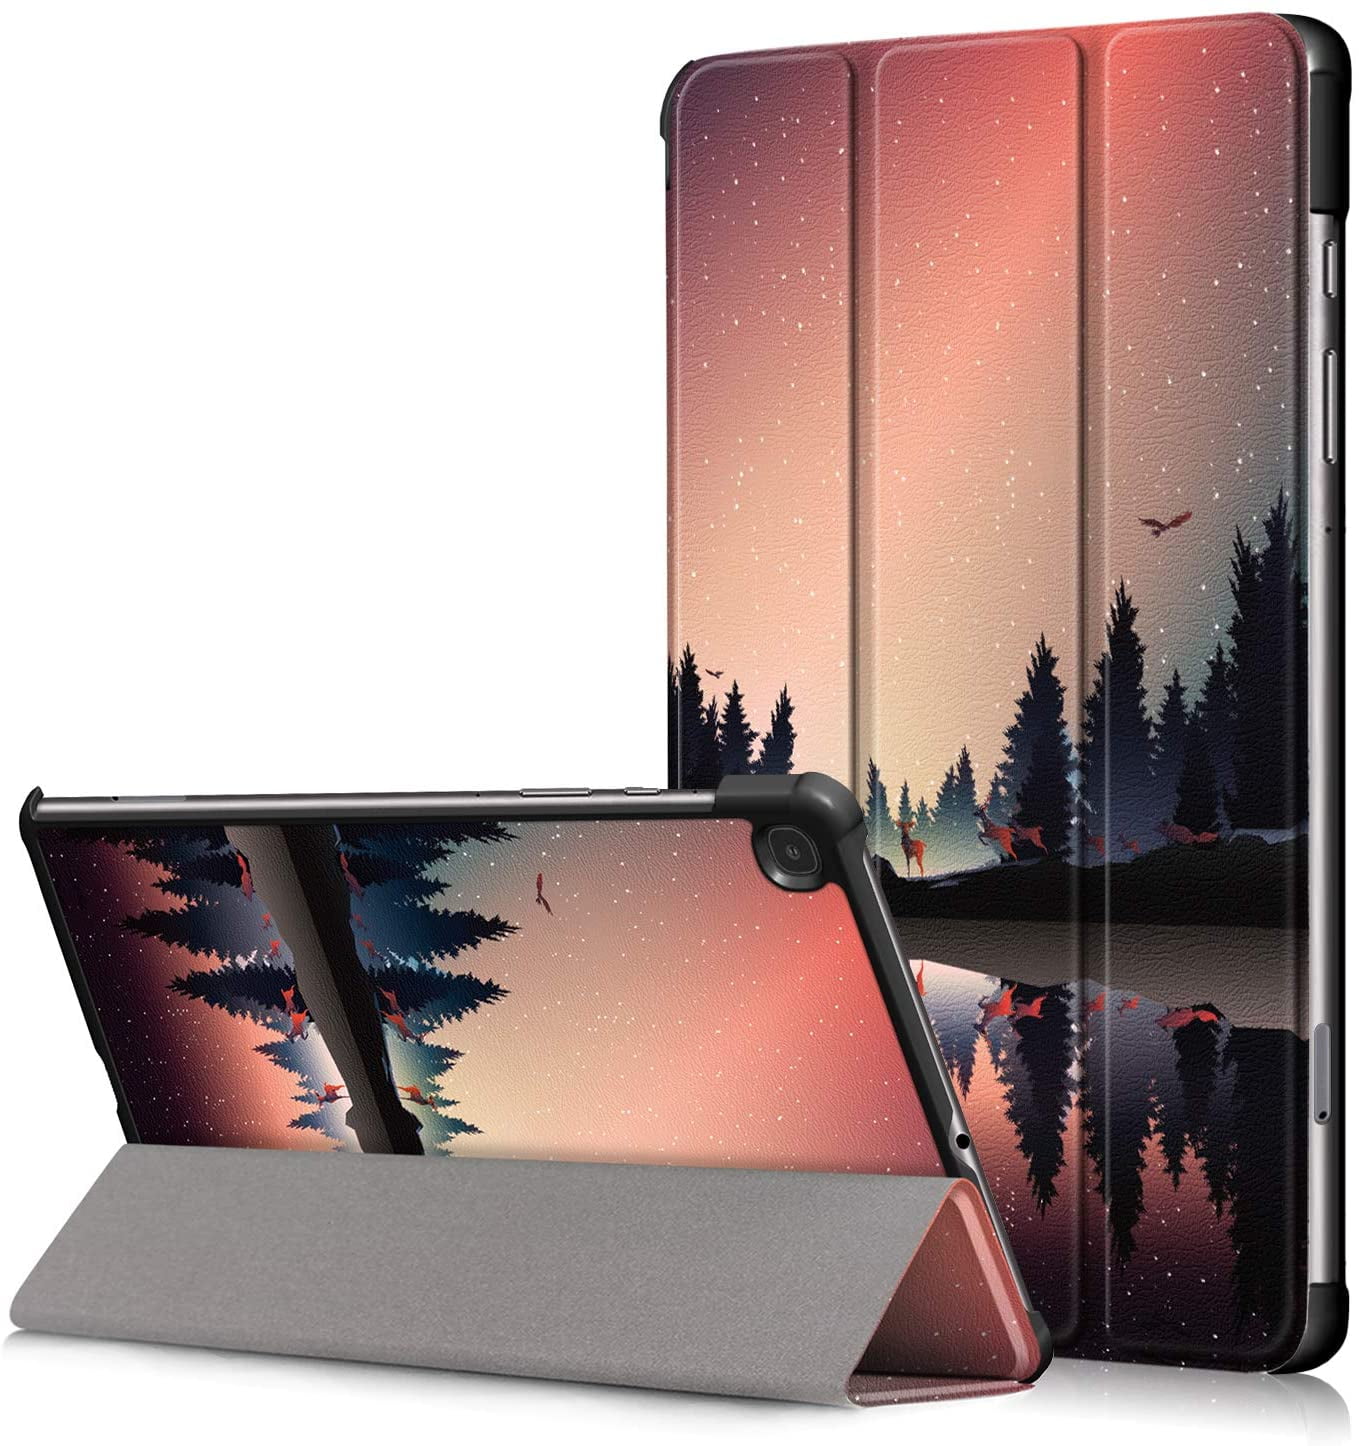 Möbelgeschäft Epicgadget Case for Samsung Tab Dusk) S6 Galaxy with Trifold Sleep/Wake Auto / - SM-P613 (SM-P610 Lite Smart / Slim / 2022/2020 Stand (Forest SM-P615 Case Cover Model SM-T619) Case 10.4\